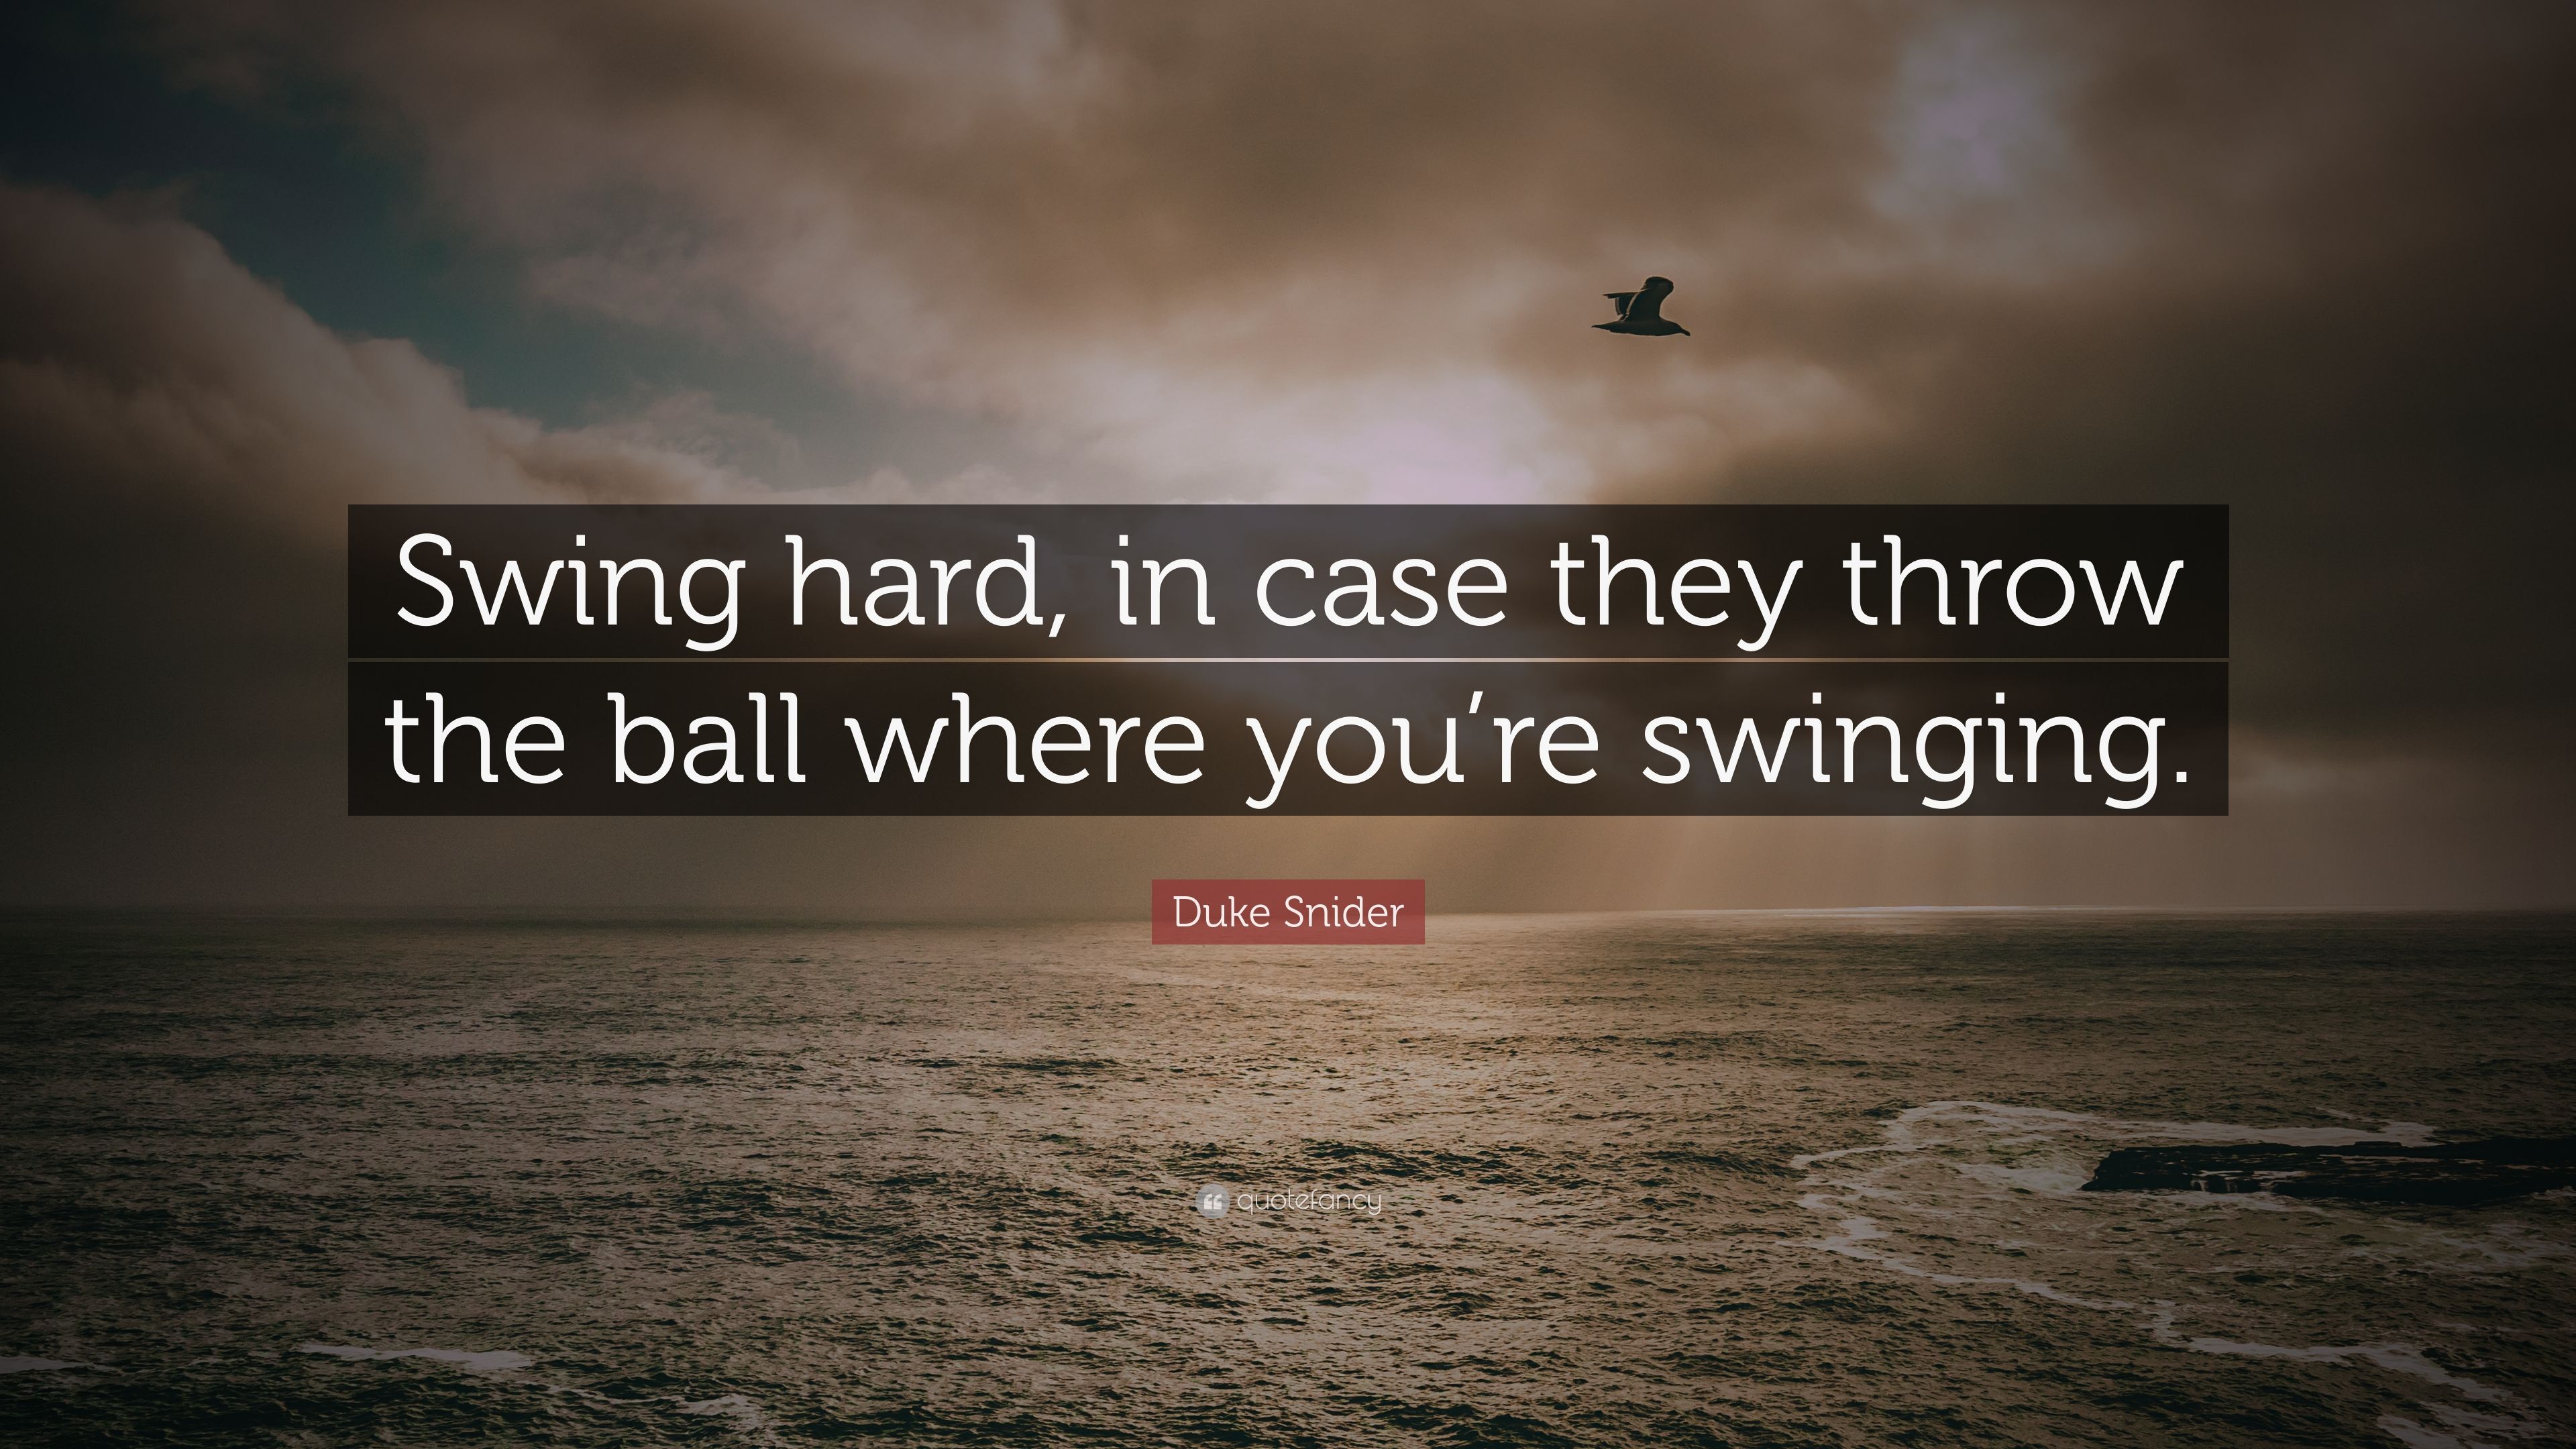 Duke Snider Quote: “Swing hard, in case they throw the ball where ...